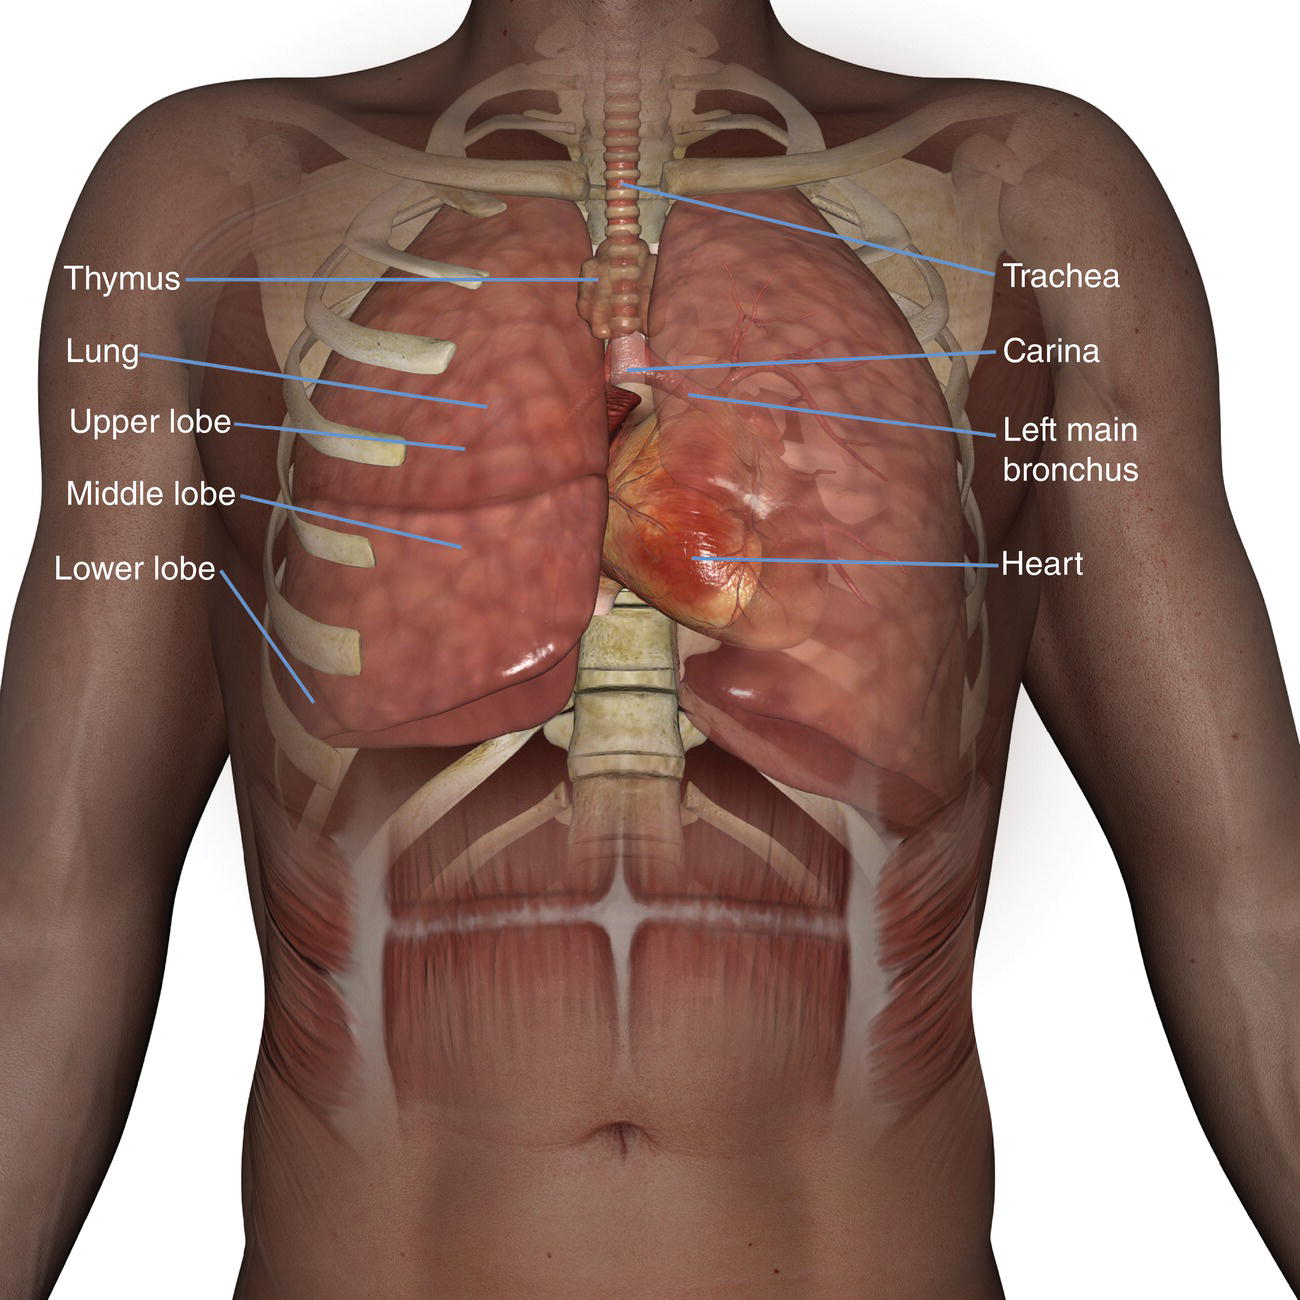 what is considered anatomic dead space in the lung